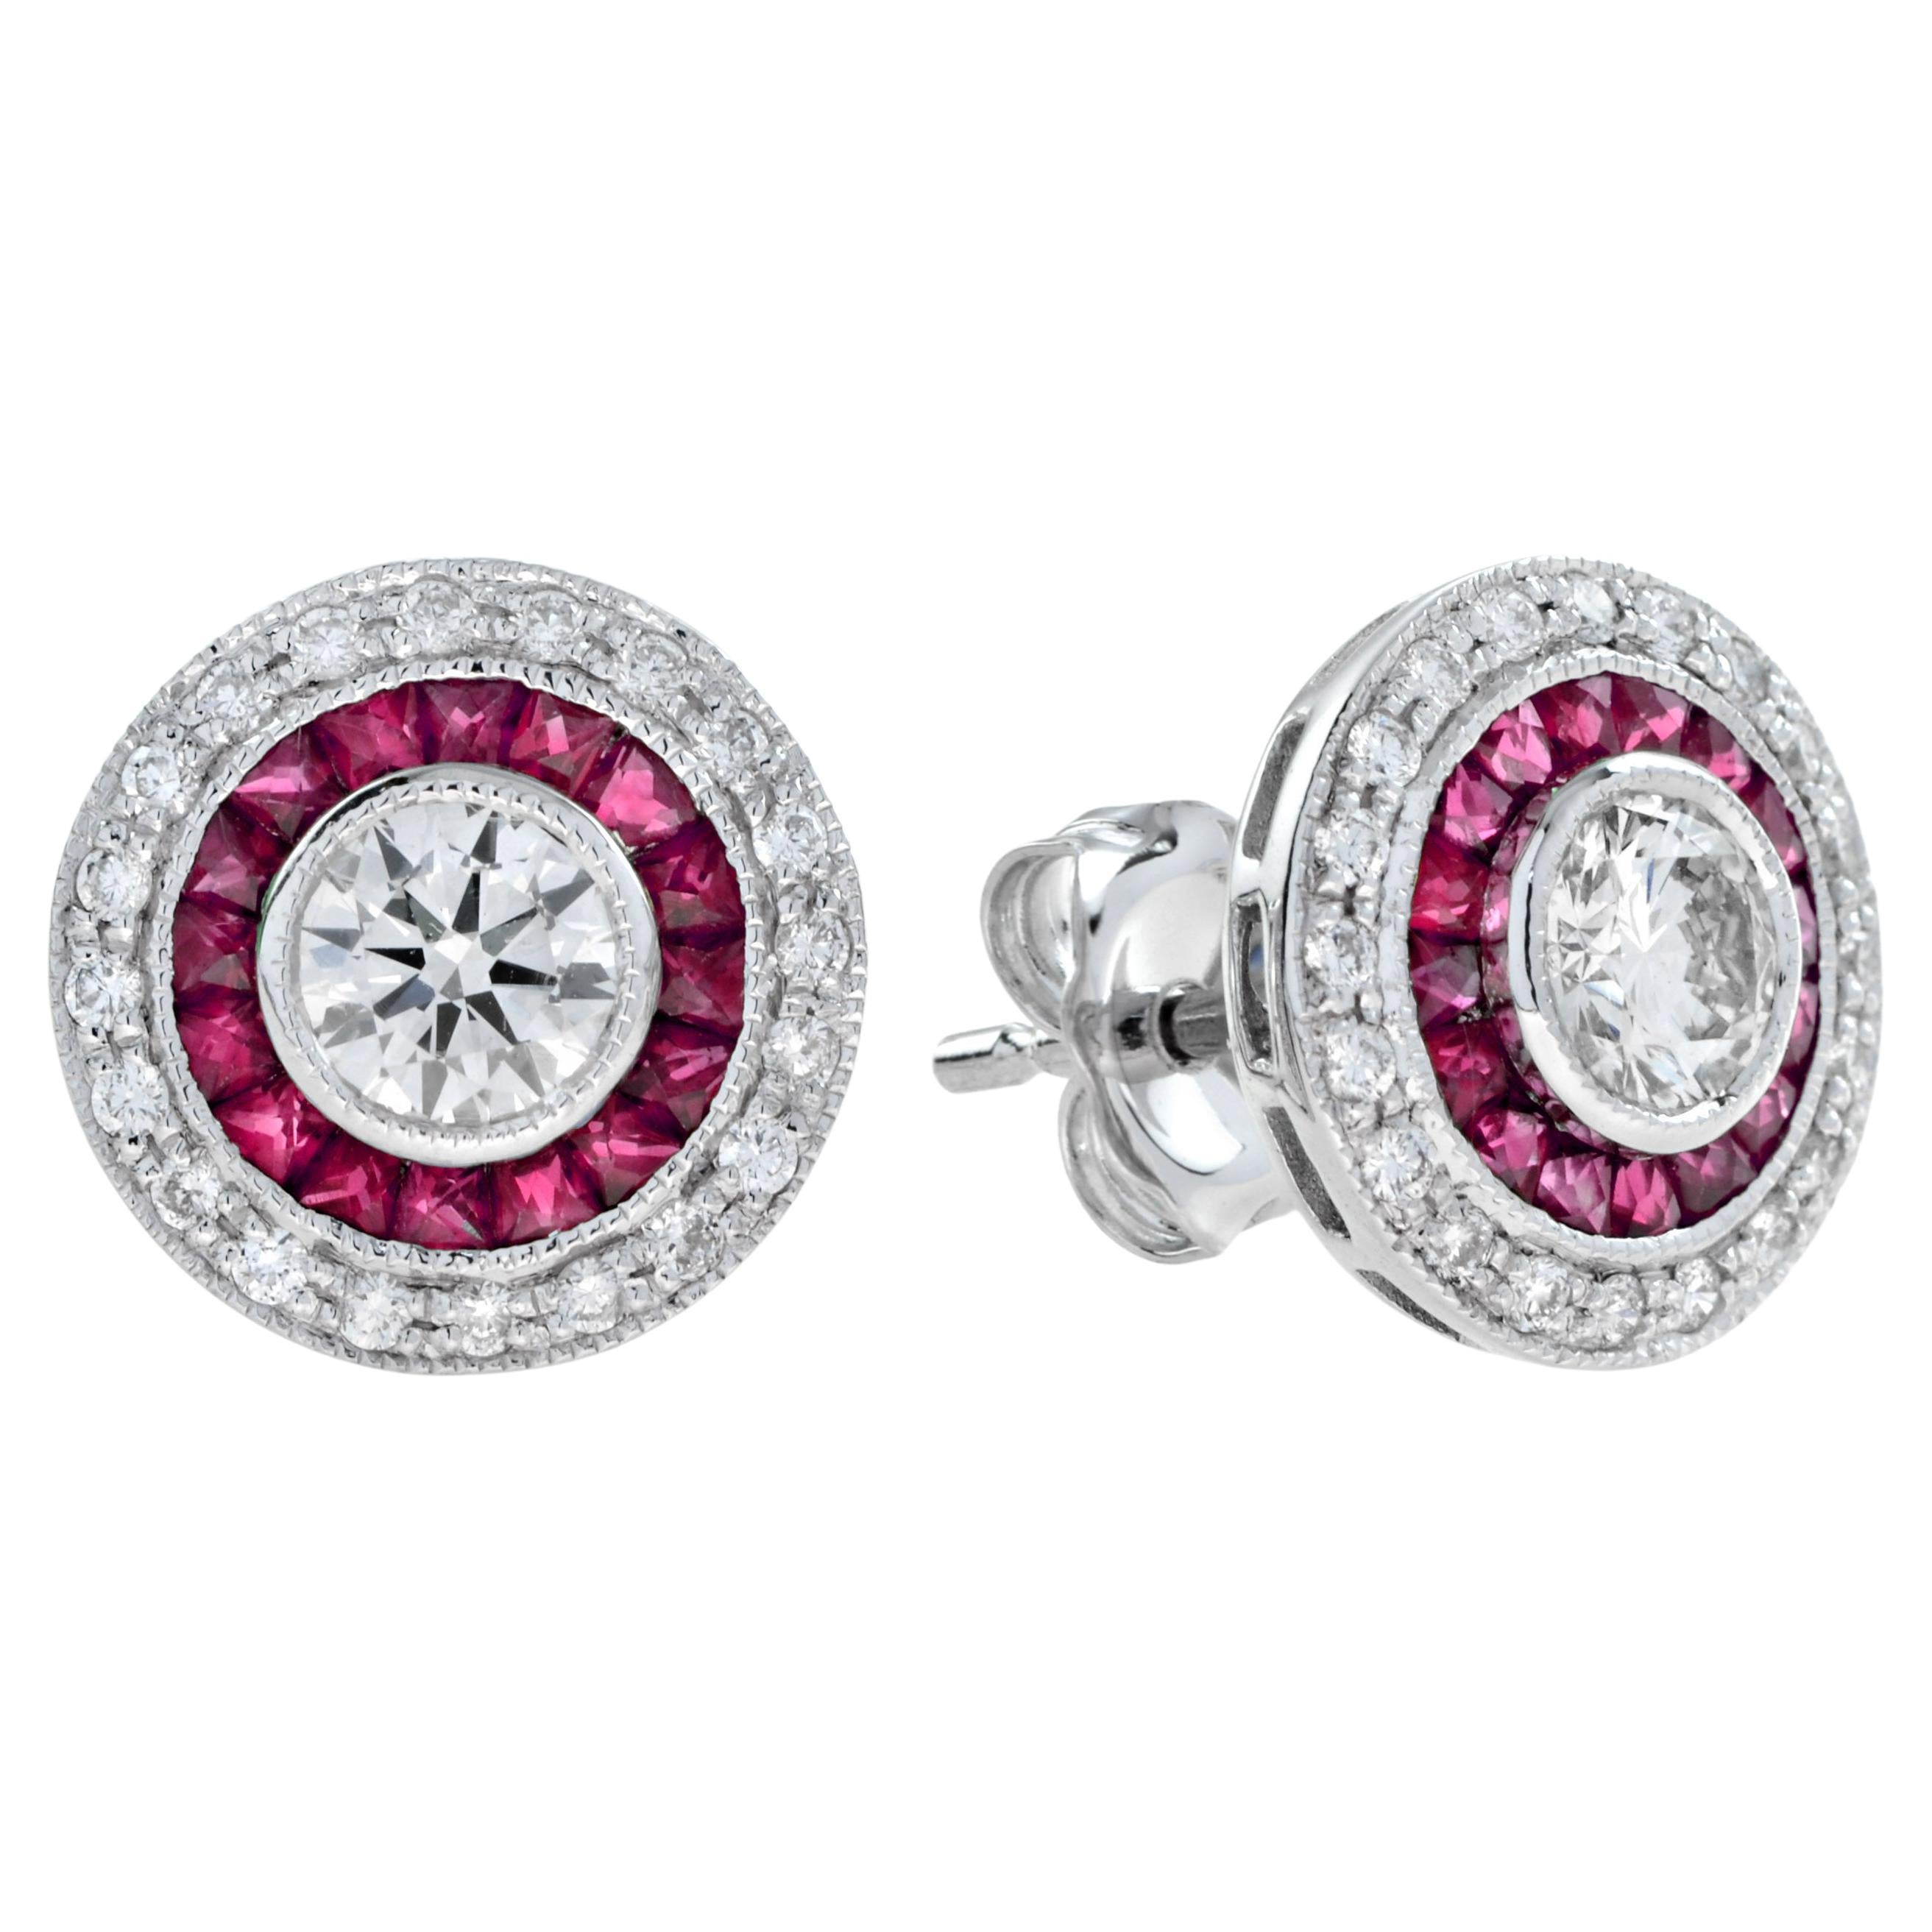 Art Deco Style 4.4 Round Diamond with Ruby Stud Earrings in 18K White Gold For Sale